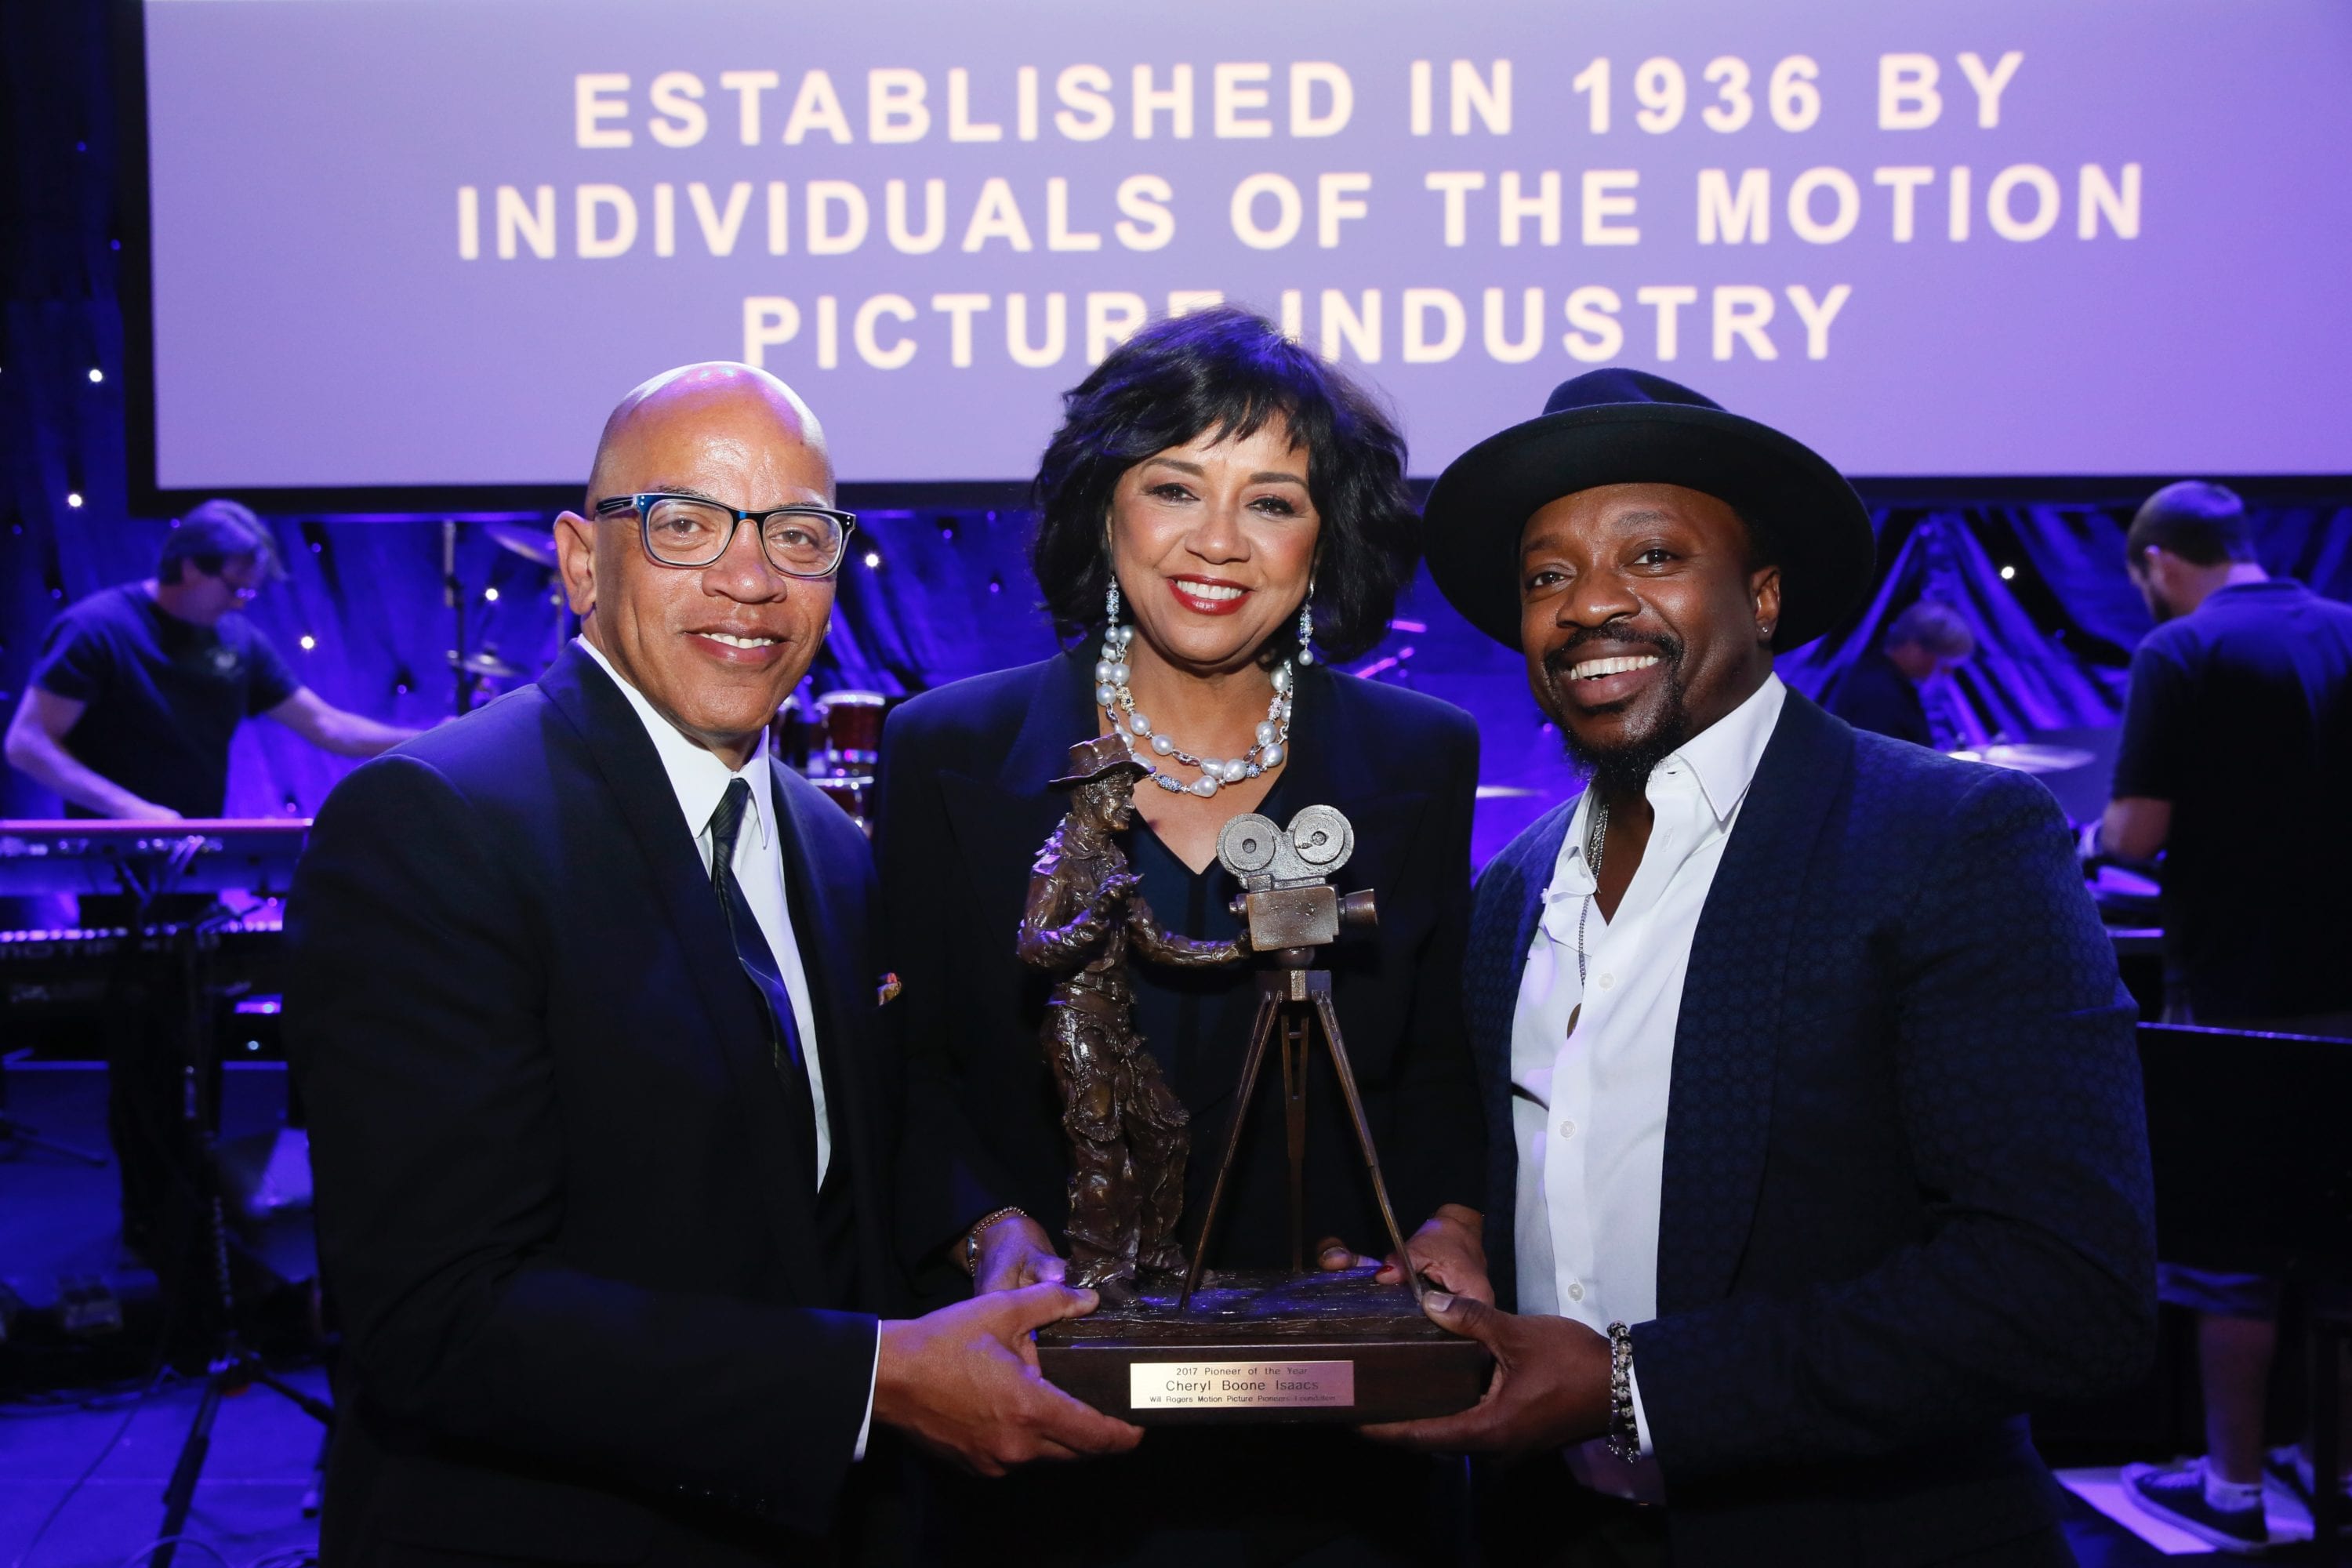 Pioneer of the Year Dinner honoring Cheryl Boone Isaacs  at CinemaCon 2017